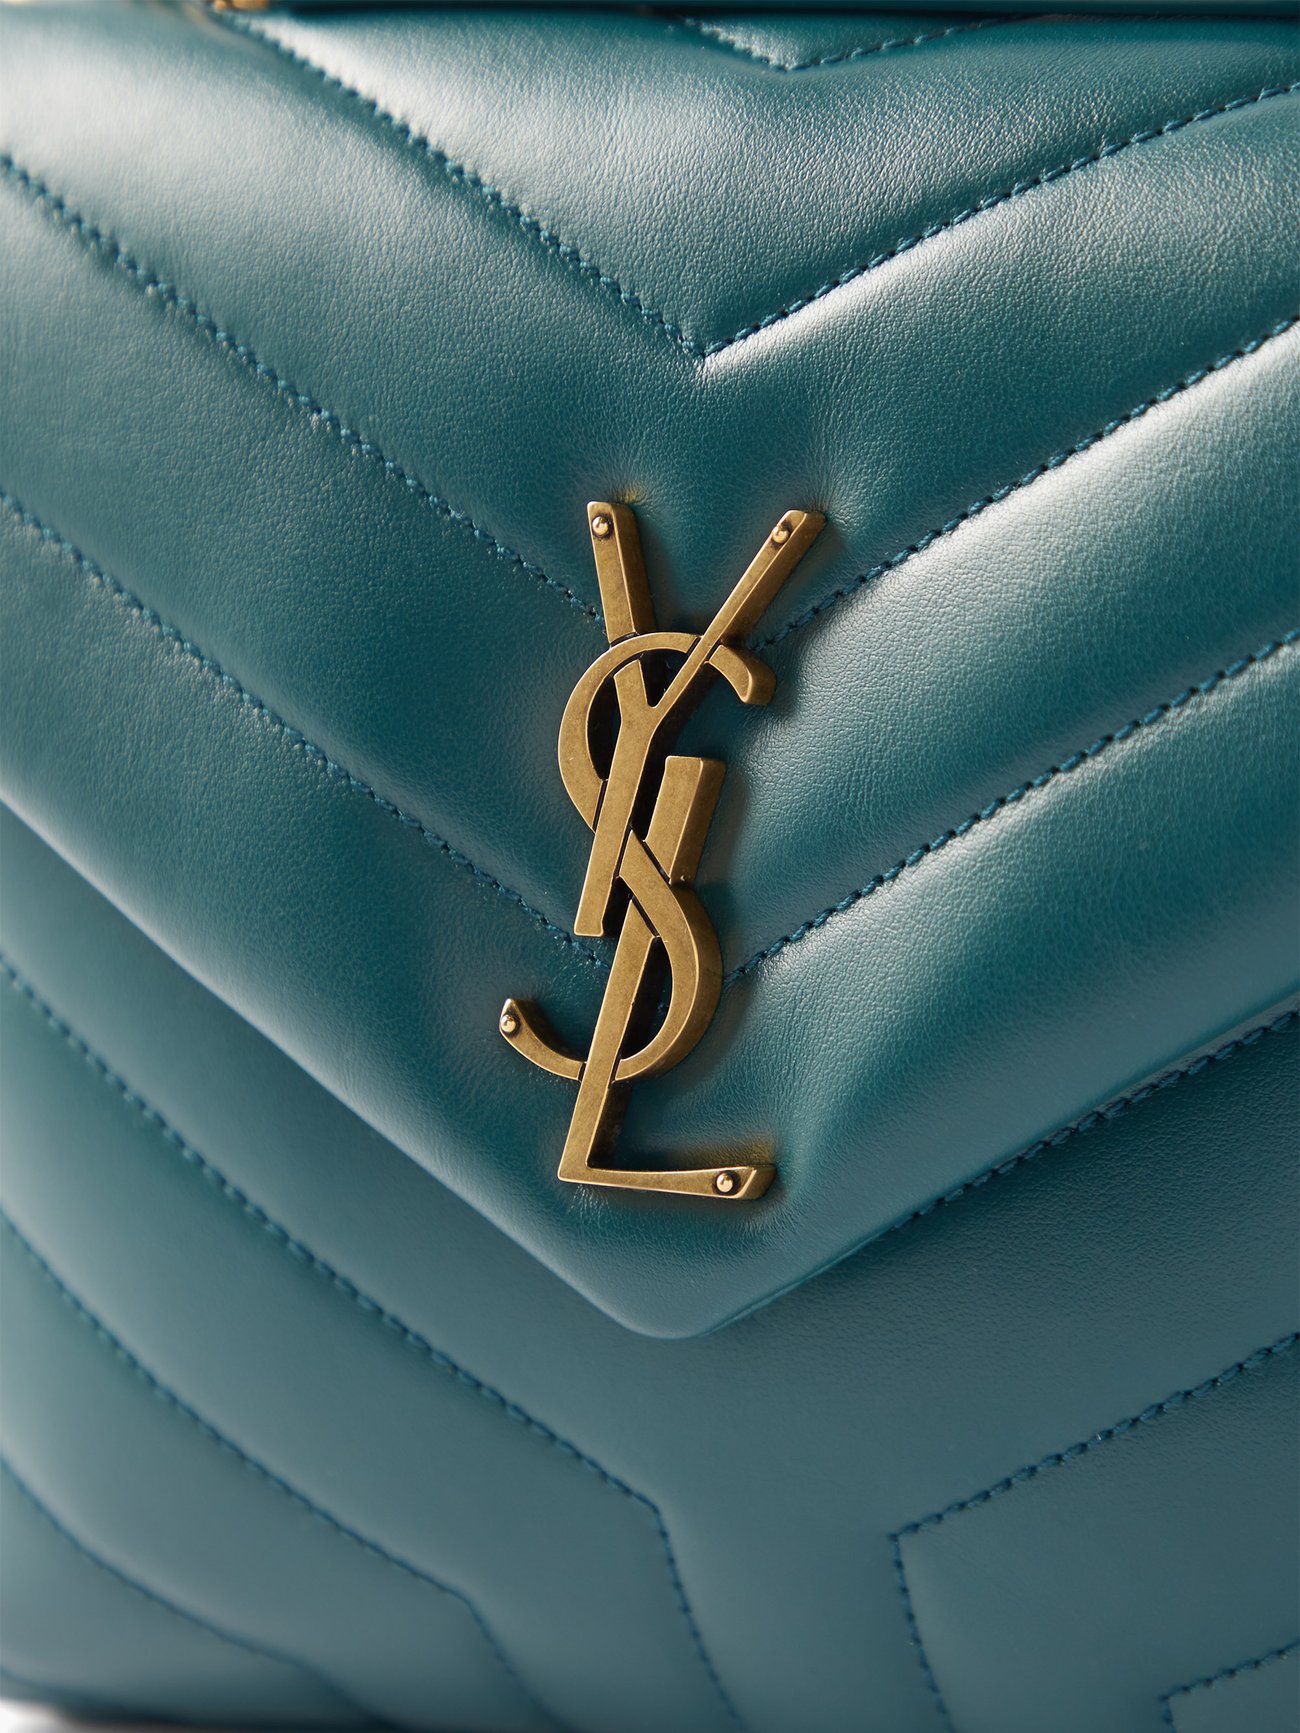 Blue Loulou small quilted leather shoulder bag, Saint Laurent